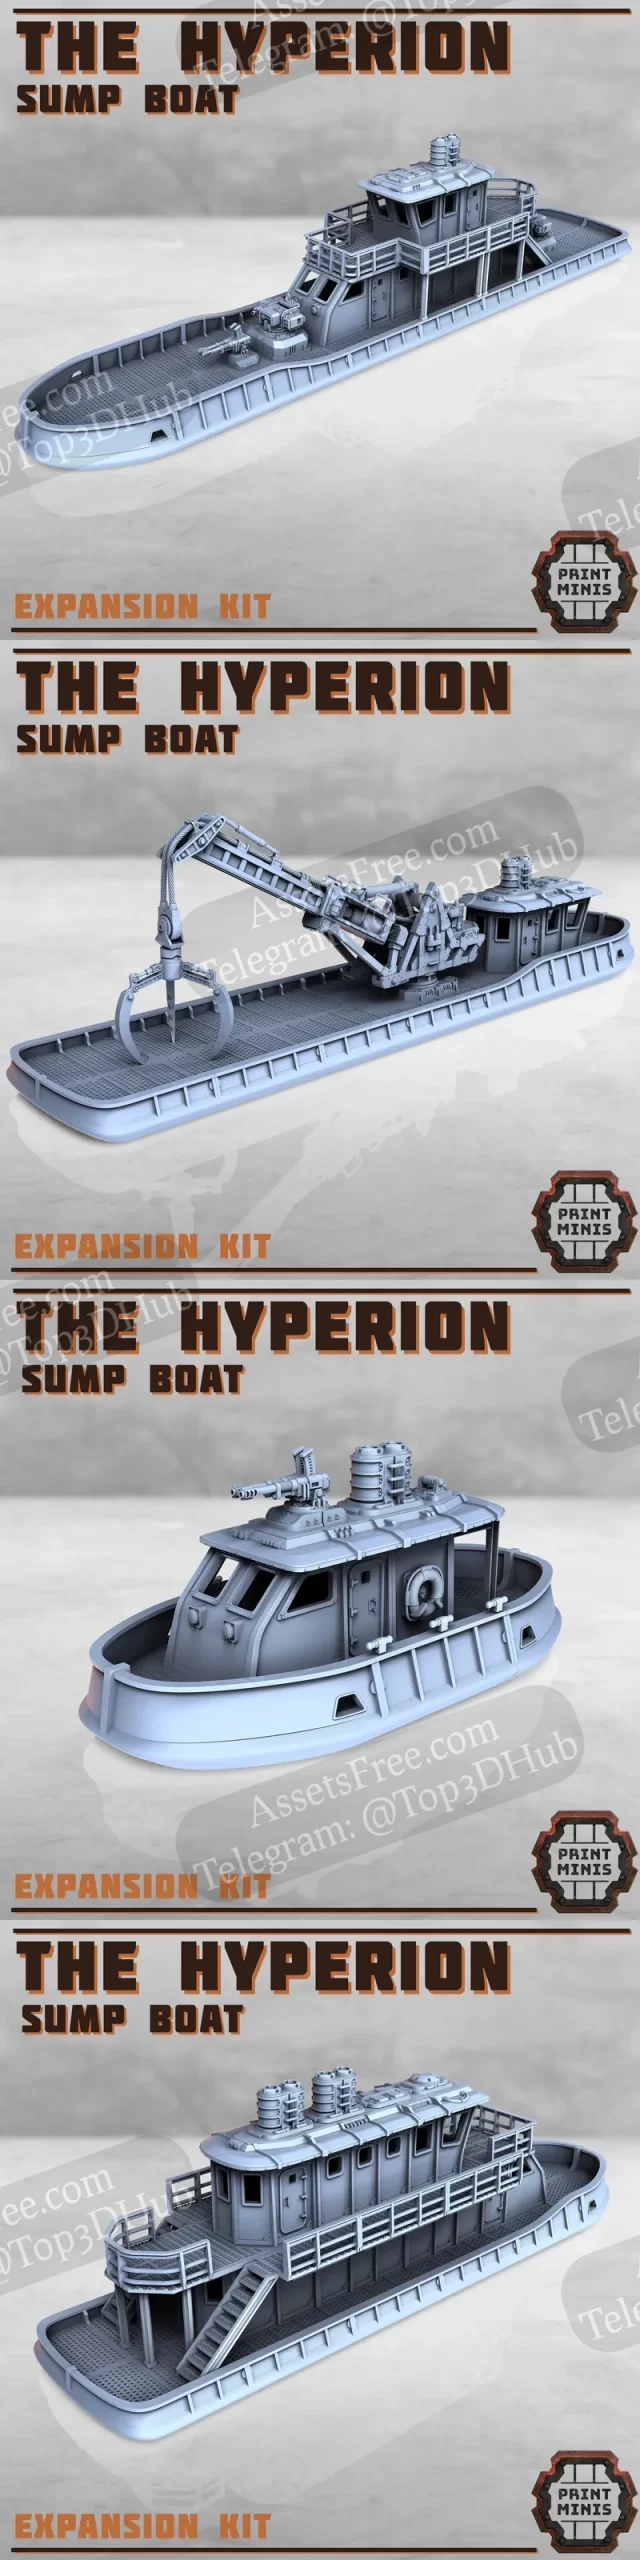 Hyperion Boat Expansion